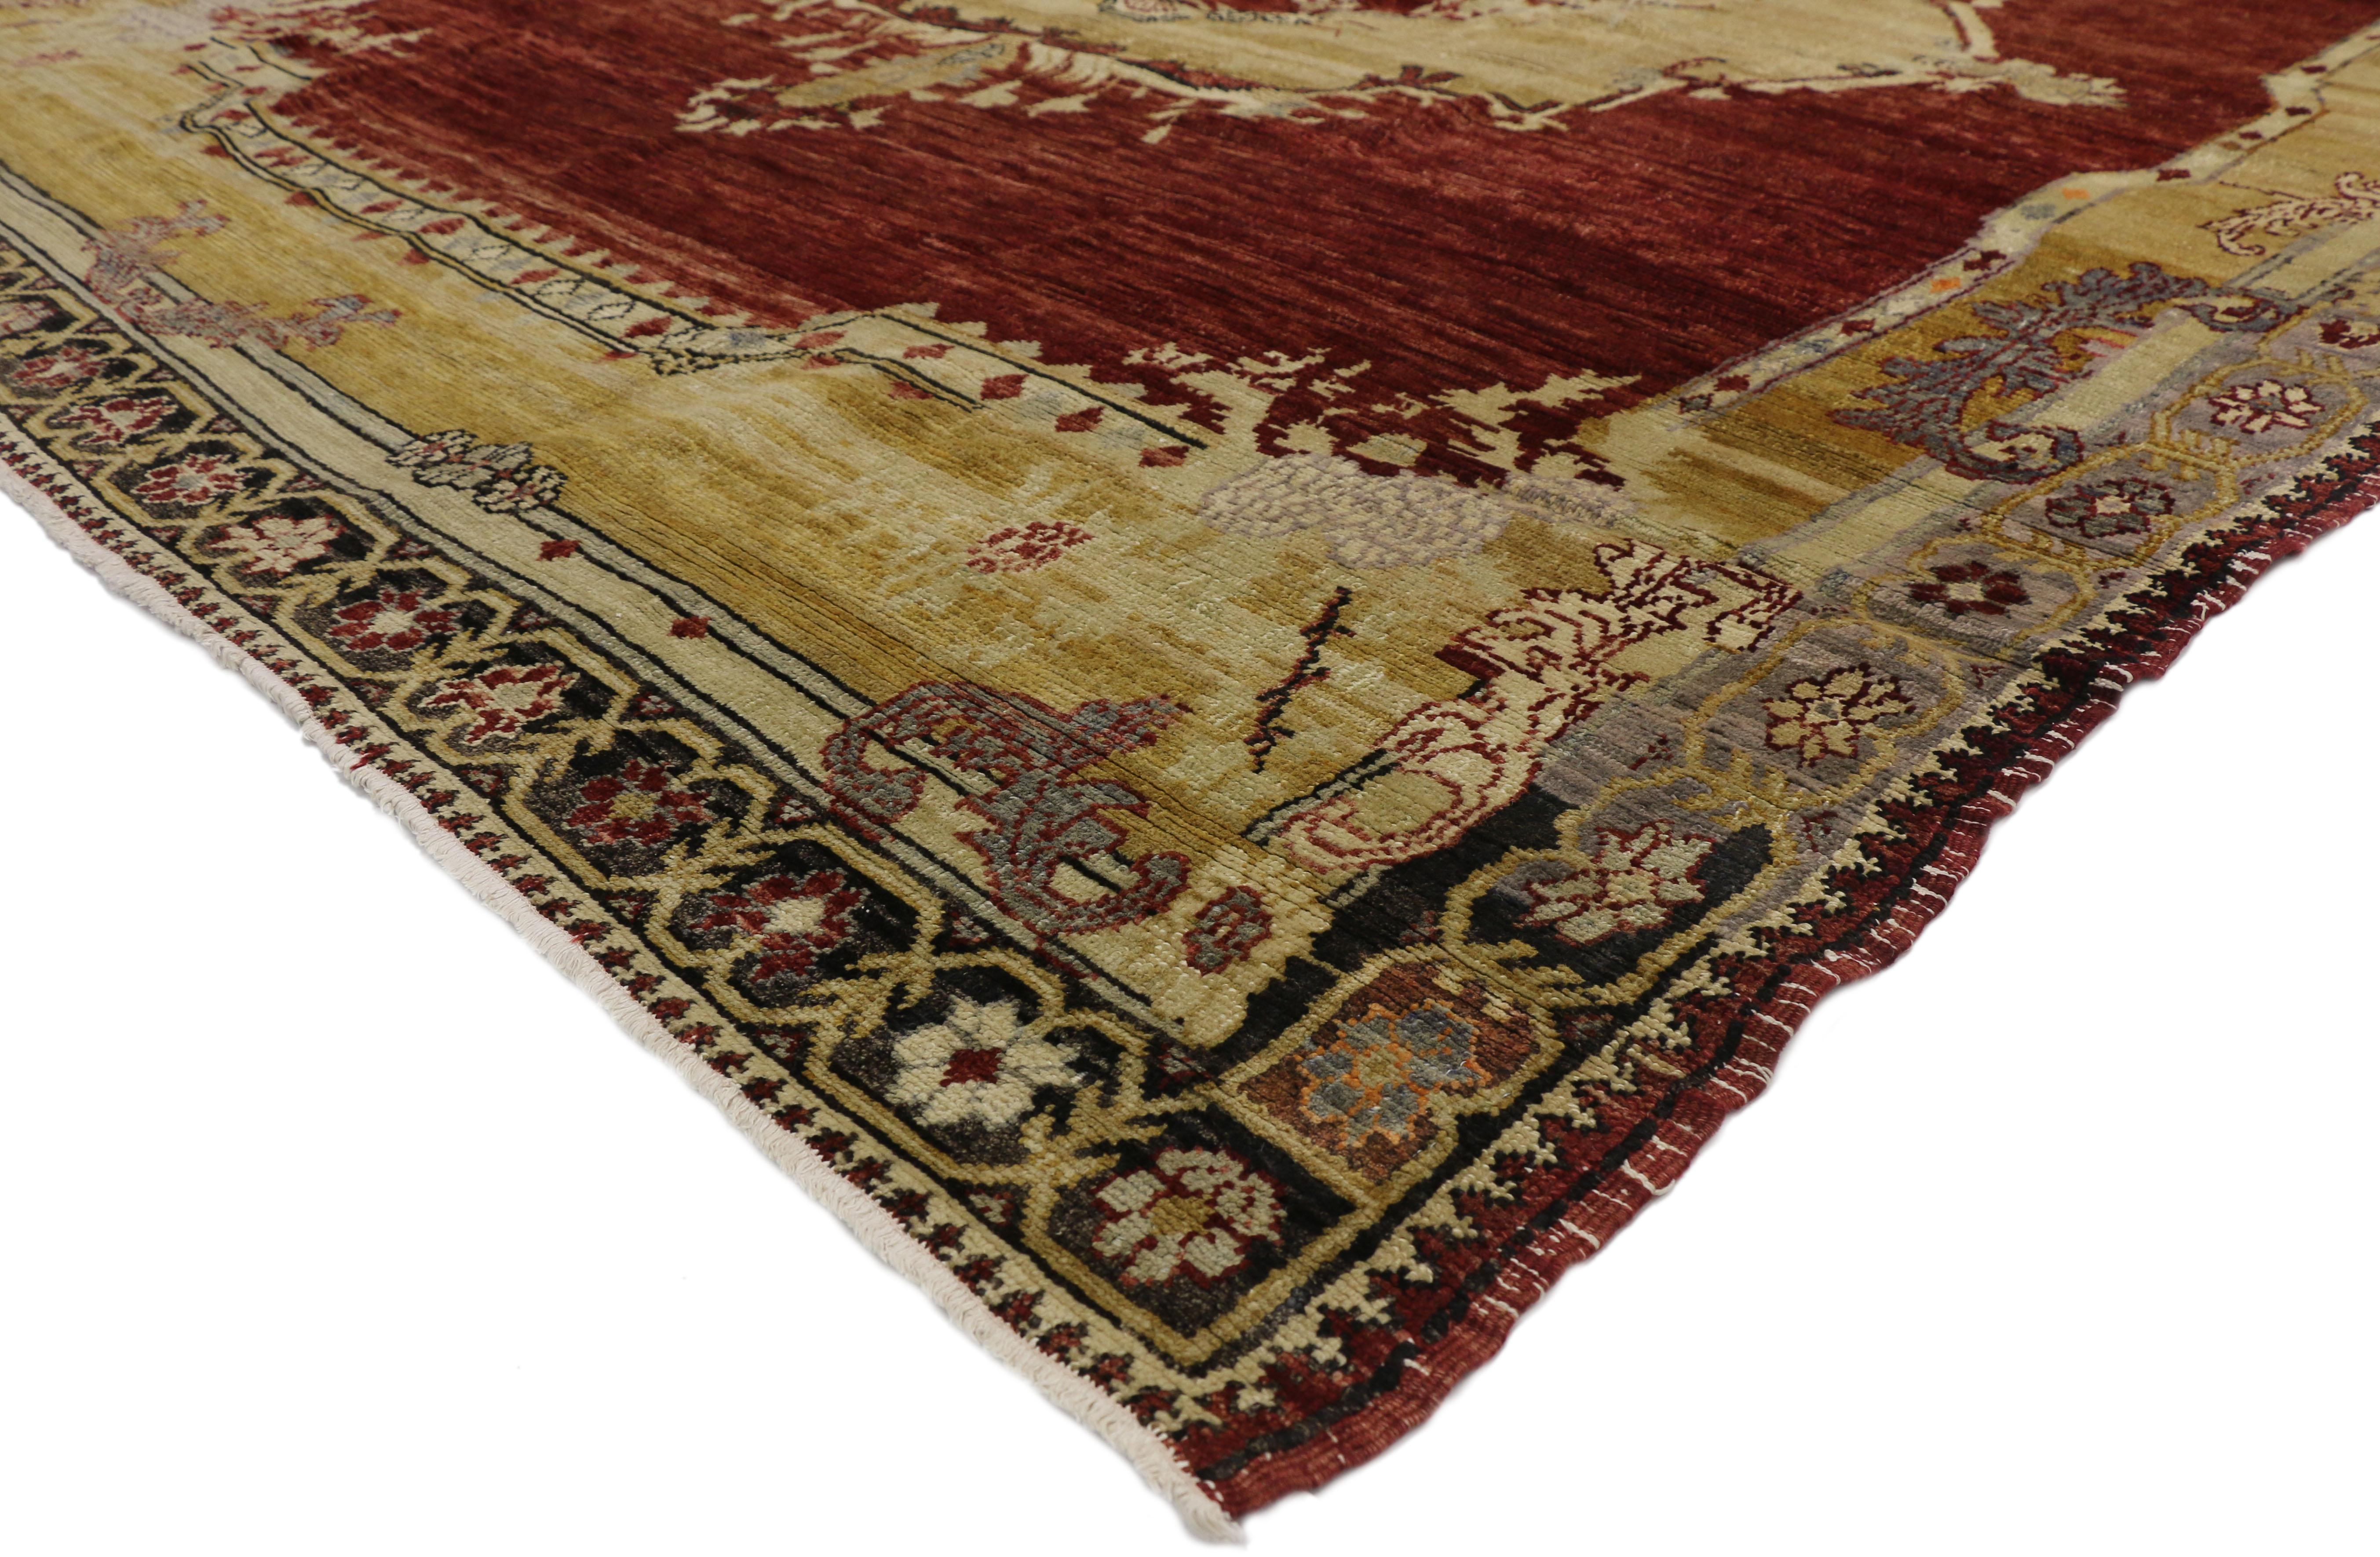 50650 Vintage Turkish Sivas rug with Byzantine and Gothic Revival style. This hand knotted wool features a grandeur central medallion floating in a robust sea of abrash. Each corner spandrel beautifully displays pomegranates and leafy tendrils